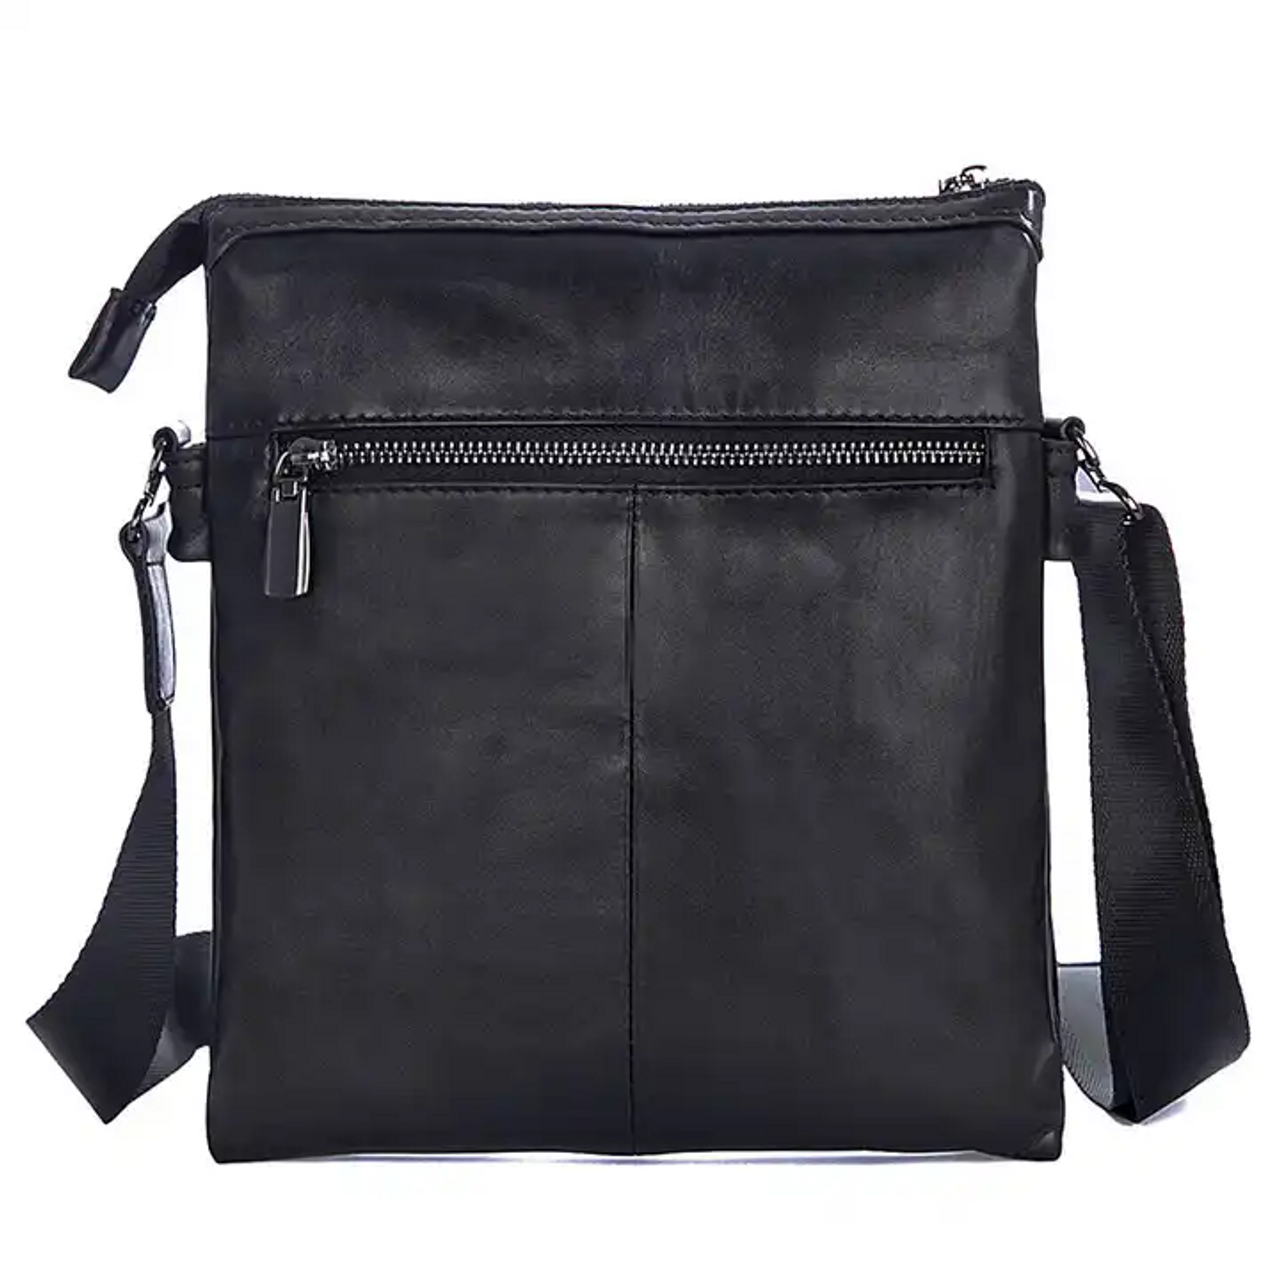 Casual Small Black Leather Business Bag